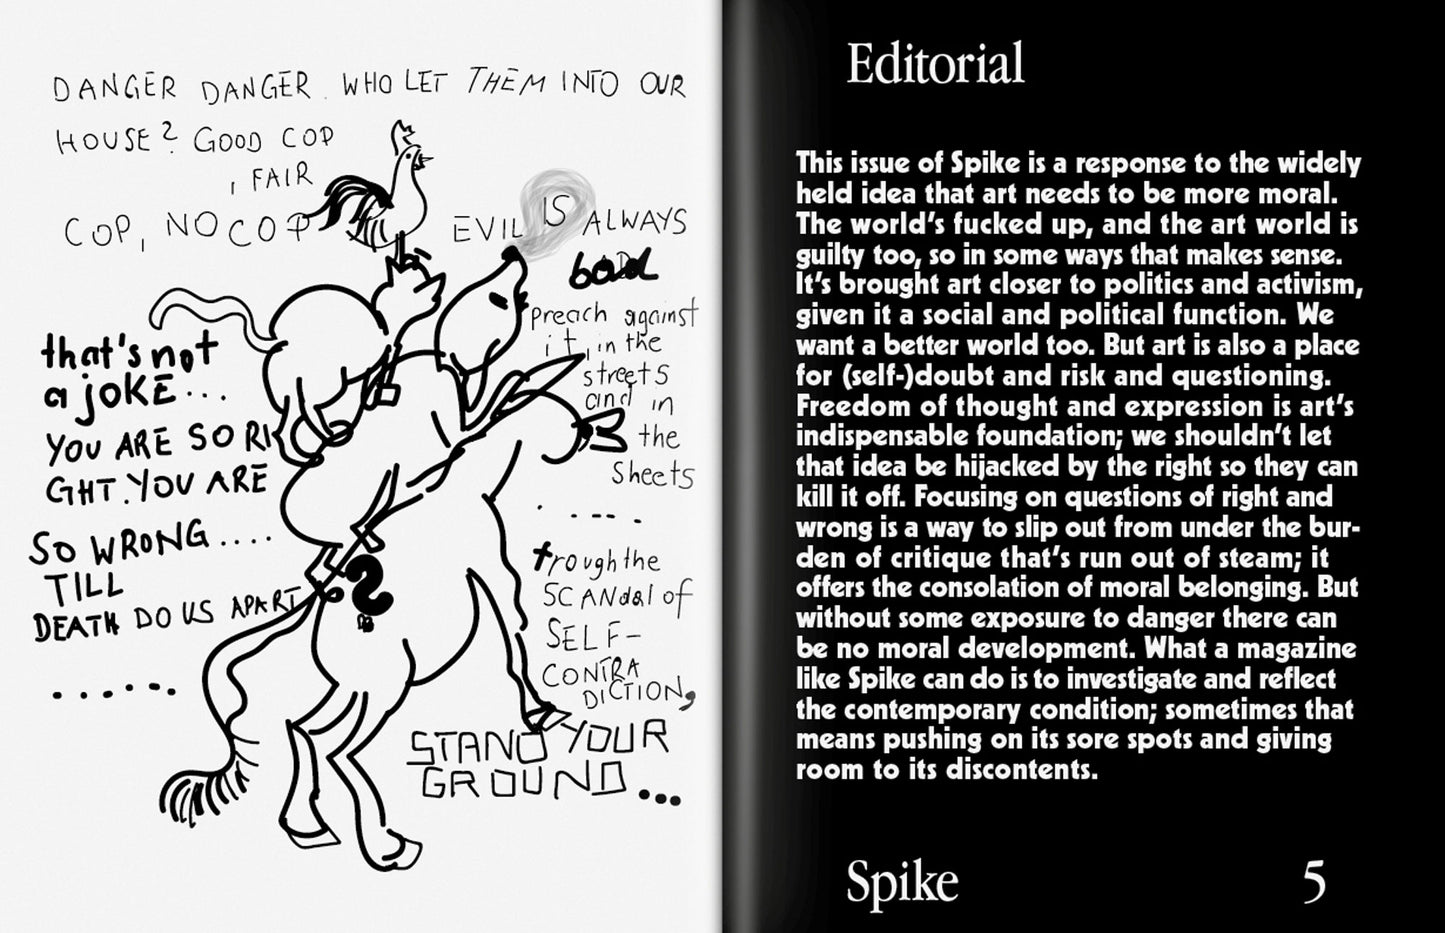 Spike ePaper (Issue 60): Immorality